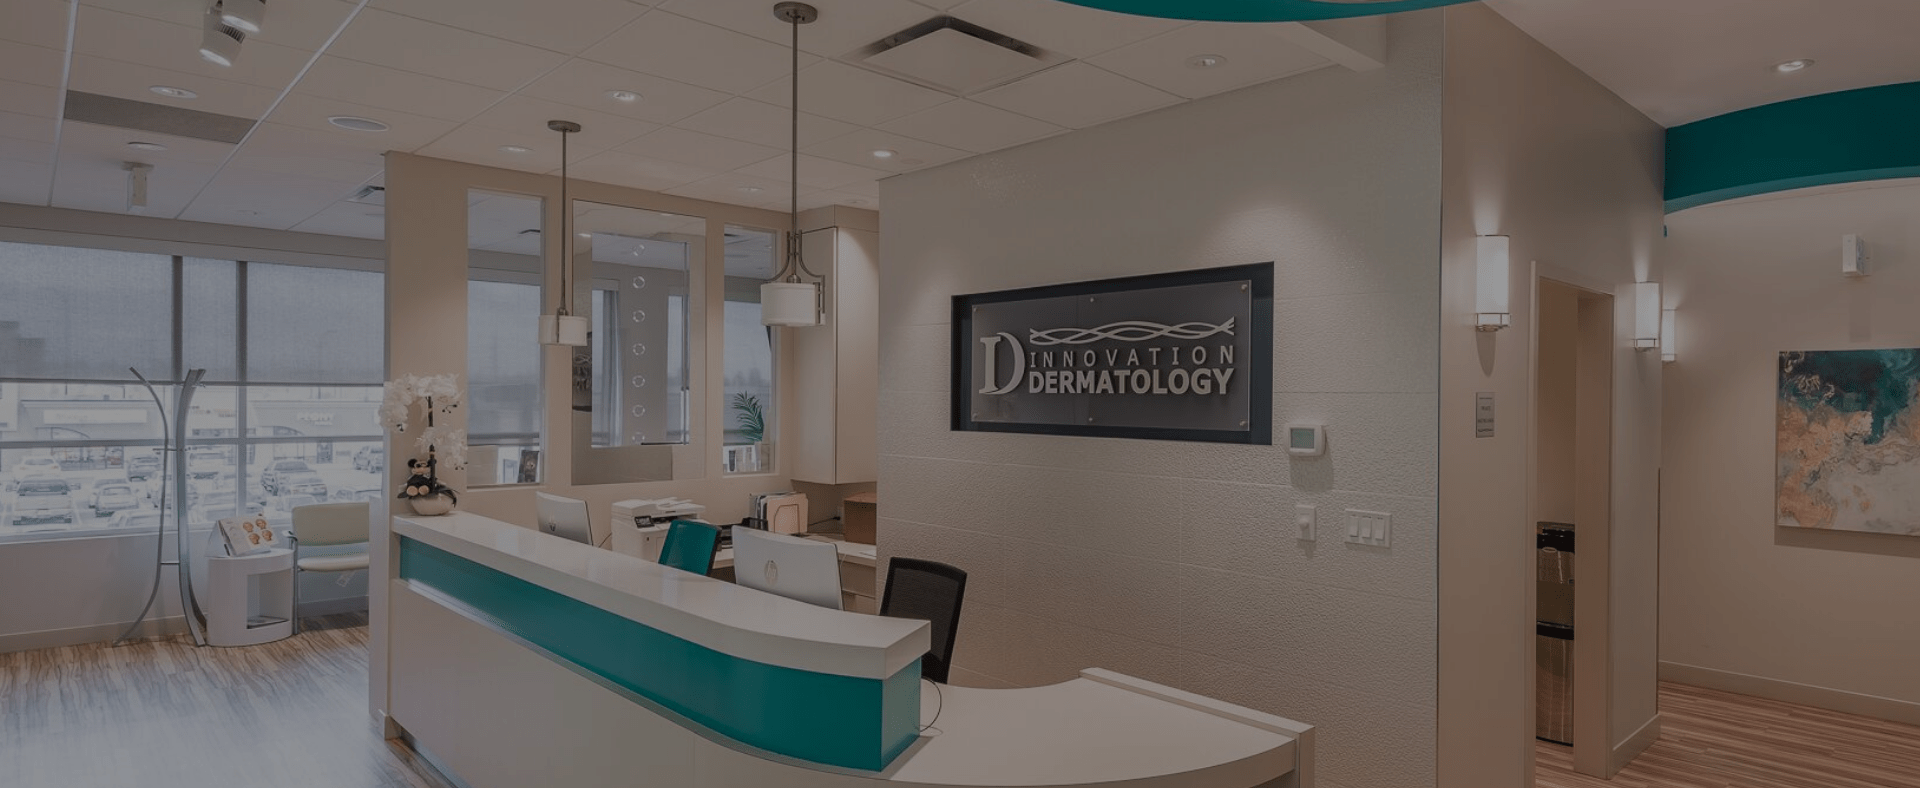 Welcoming Reception Area | Innovation Dermatology | Red Deer Dermatology & Med Spa Clinic